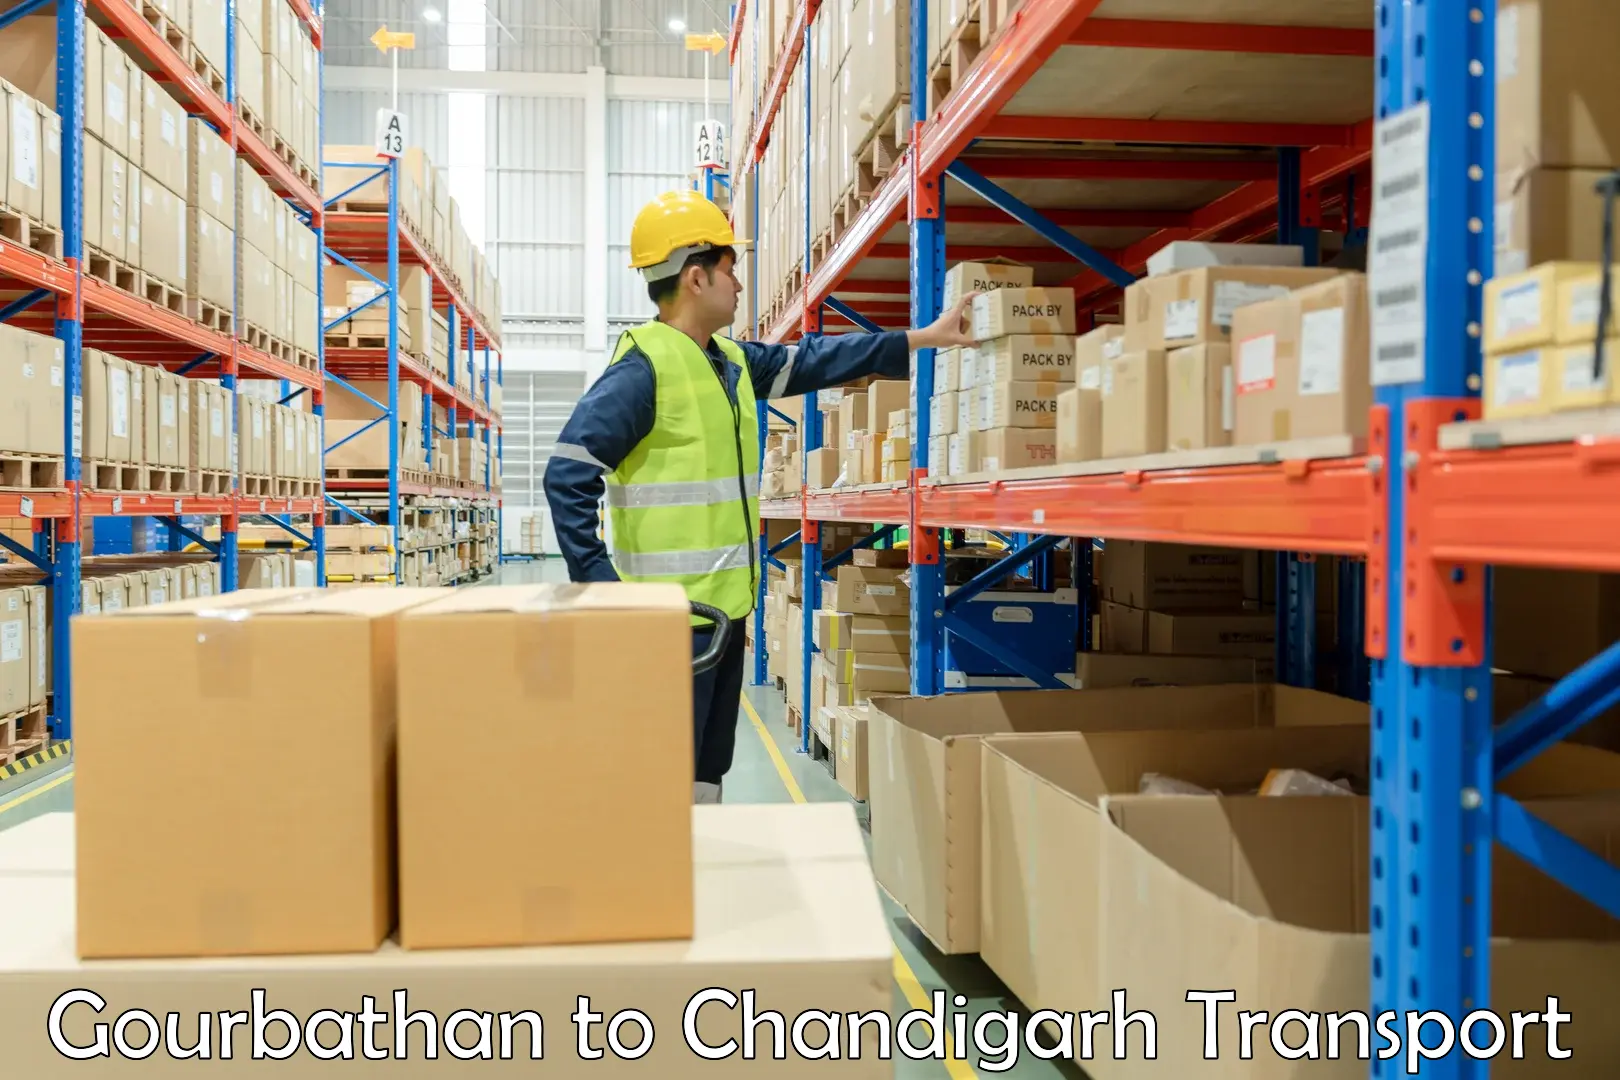 Part load transport service in India Gourbathan to Chandigarh